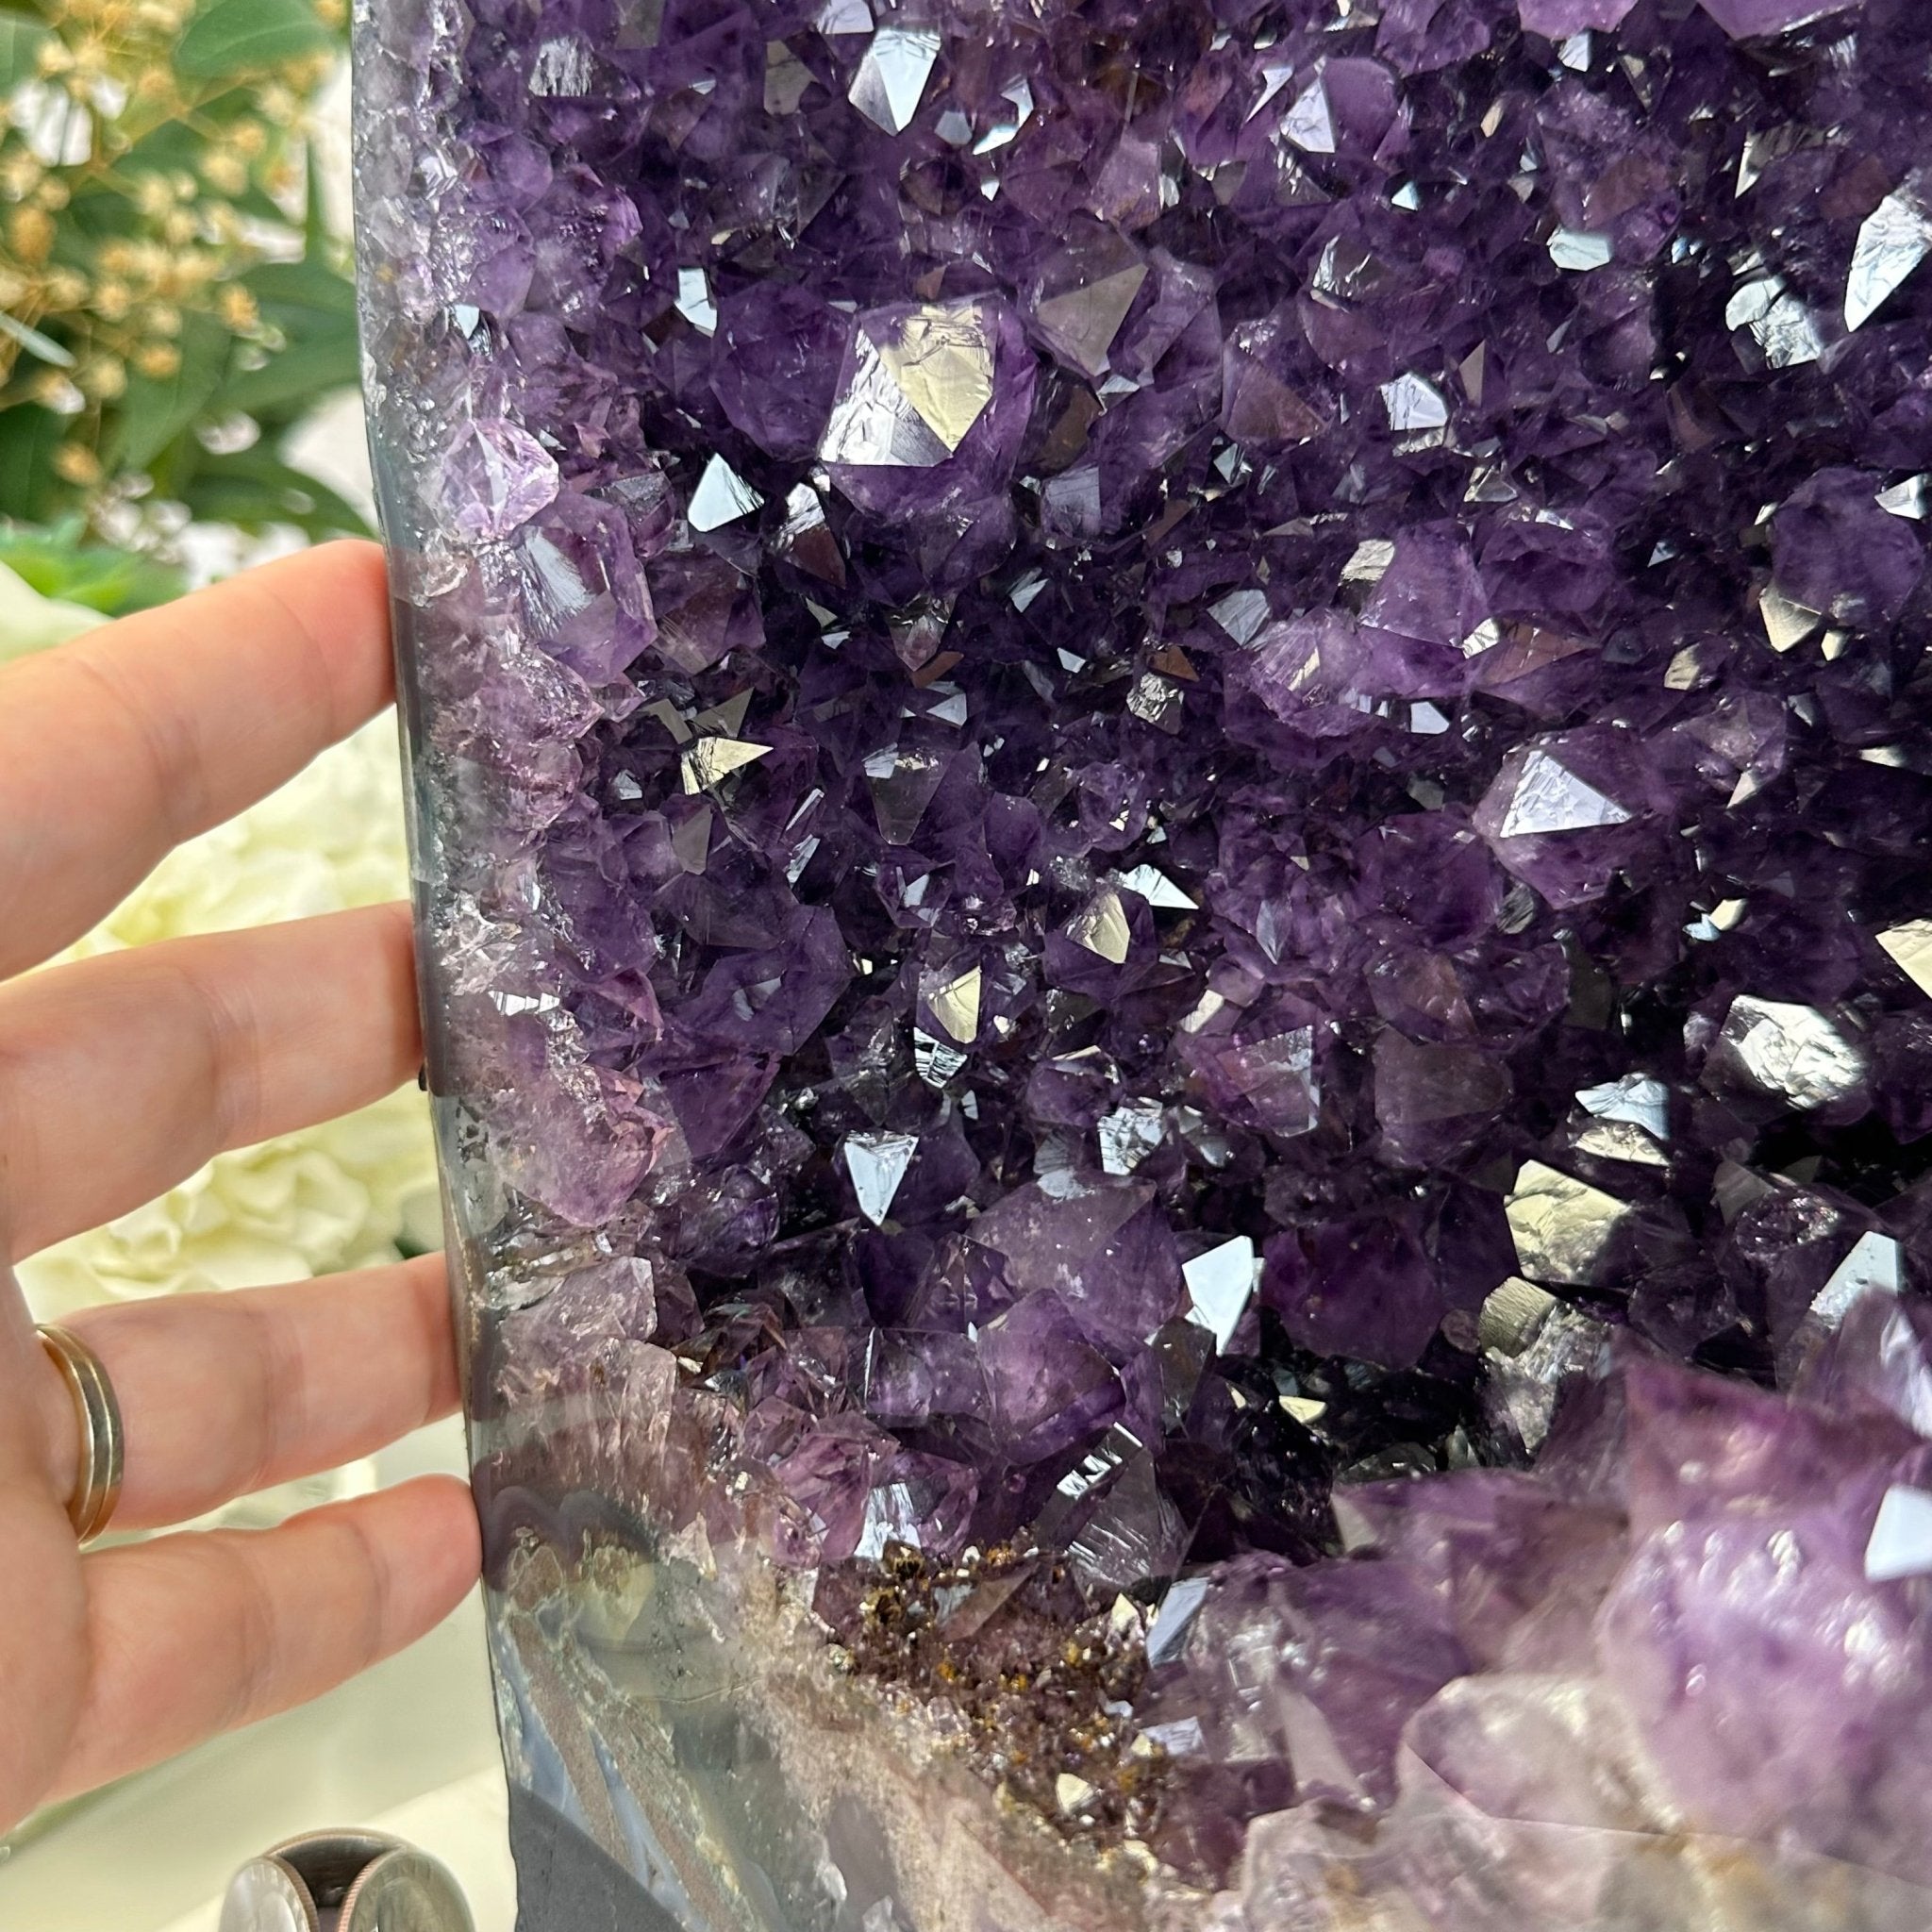 Quality Brazilian Amethyst Cathedral, 30.3 lbs & 14.9" Tall, #5601 - 1405 - Brazil GemsBrazil GemsQuality Brazilian Amethyst Cathedral, 30.3 lbs & 14.9" Tall, #5601 - 1405Cathedrals5601 - 1405